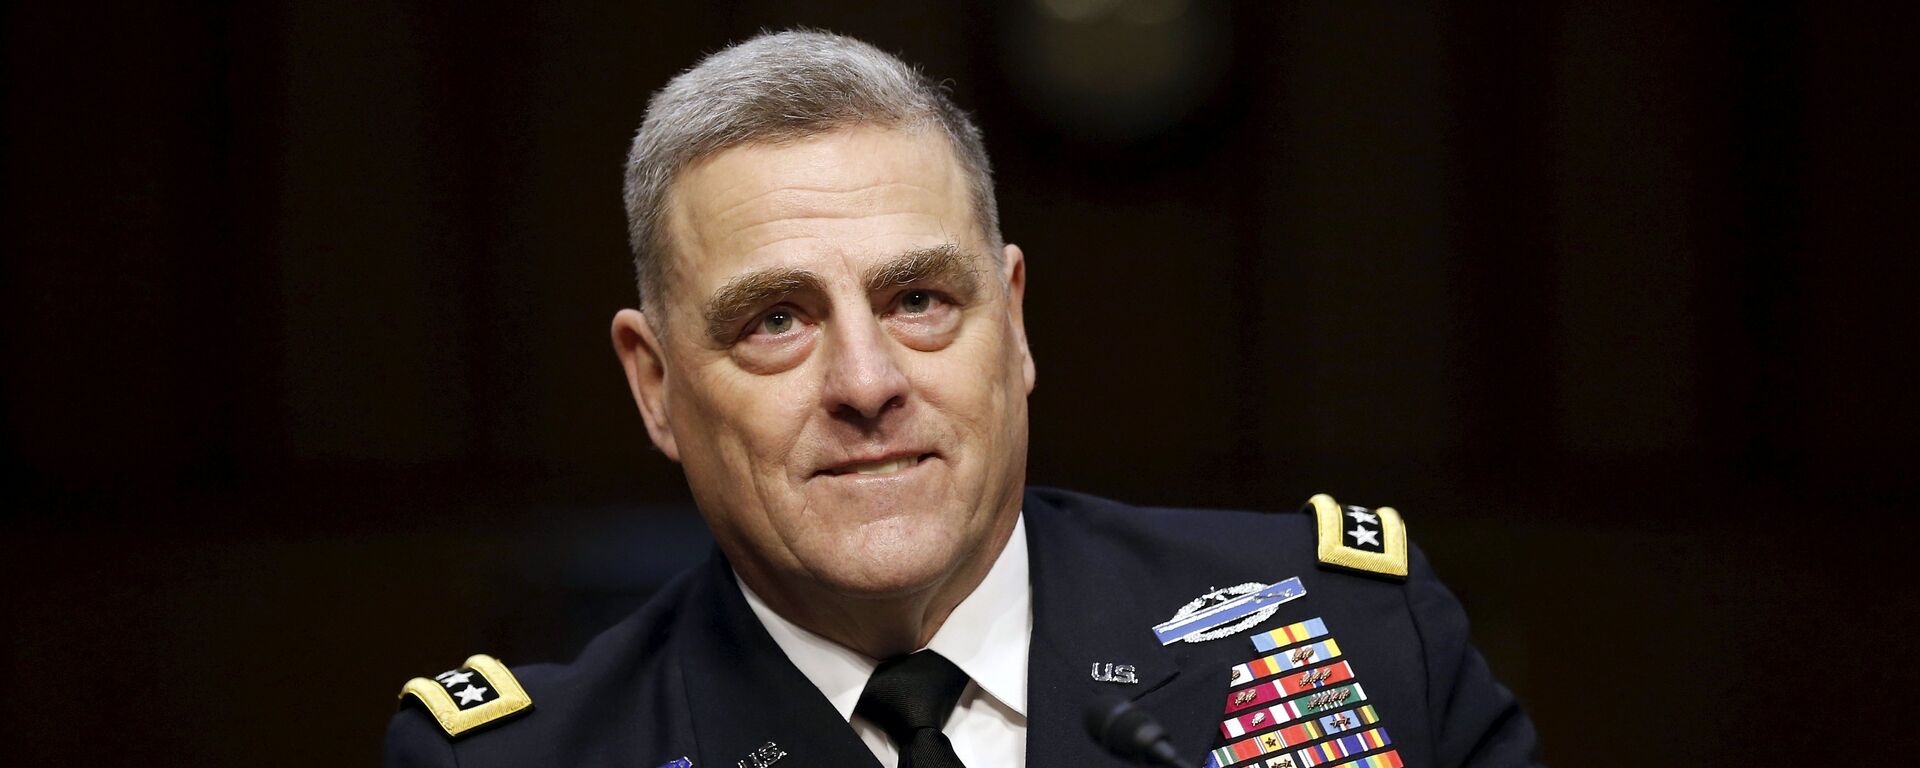 U.S. Army General Mark Milley smiles as he begins his testimony at a Senate Armed Services Committee hearing on his nomination to become the Army's chief of staff, on Capitol Hill in Washington July 21, 2015 - Sputnik International, 1920, 17.09.2021